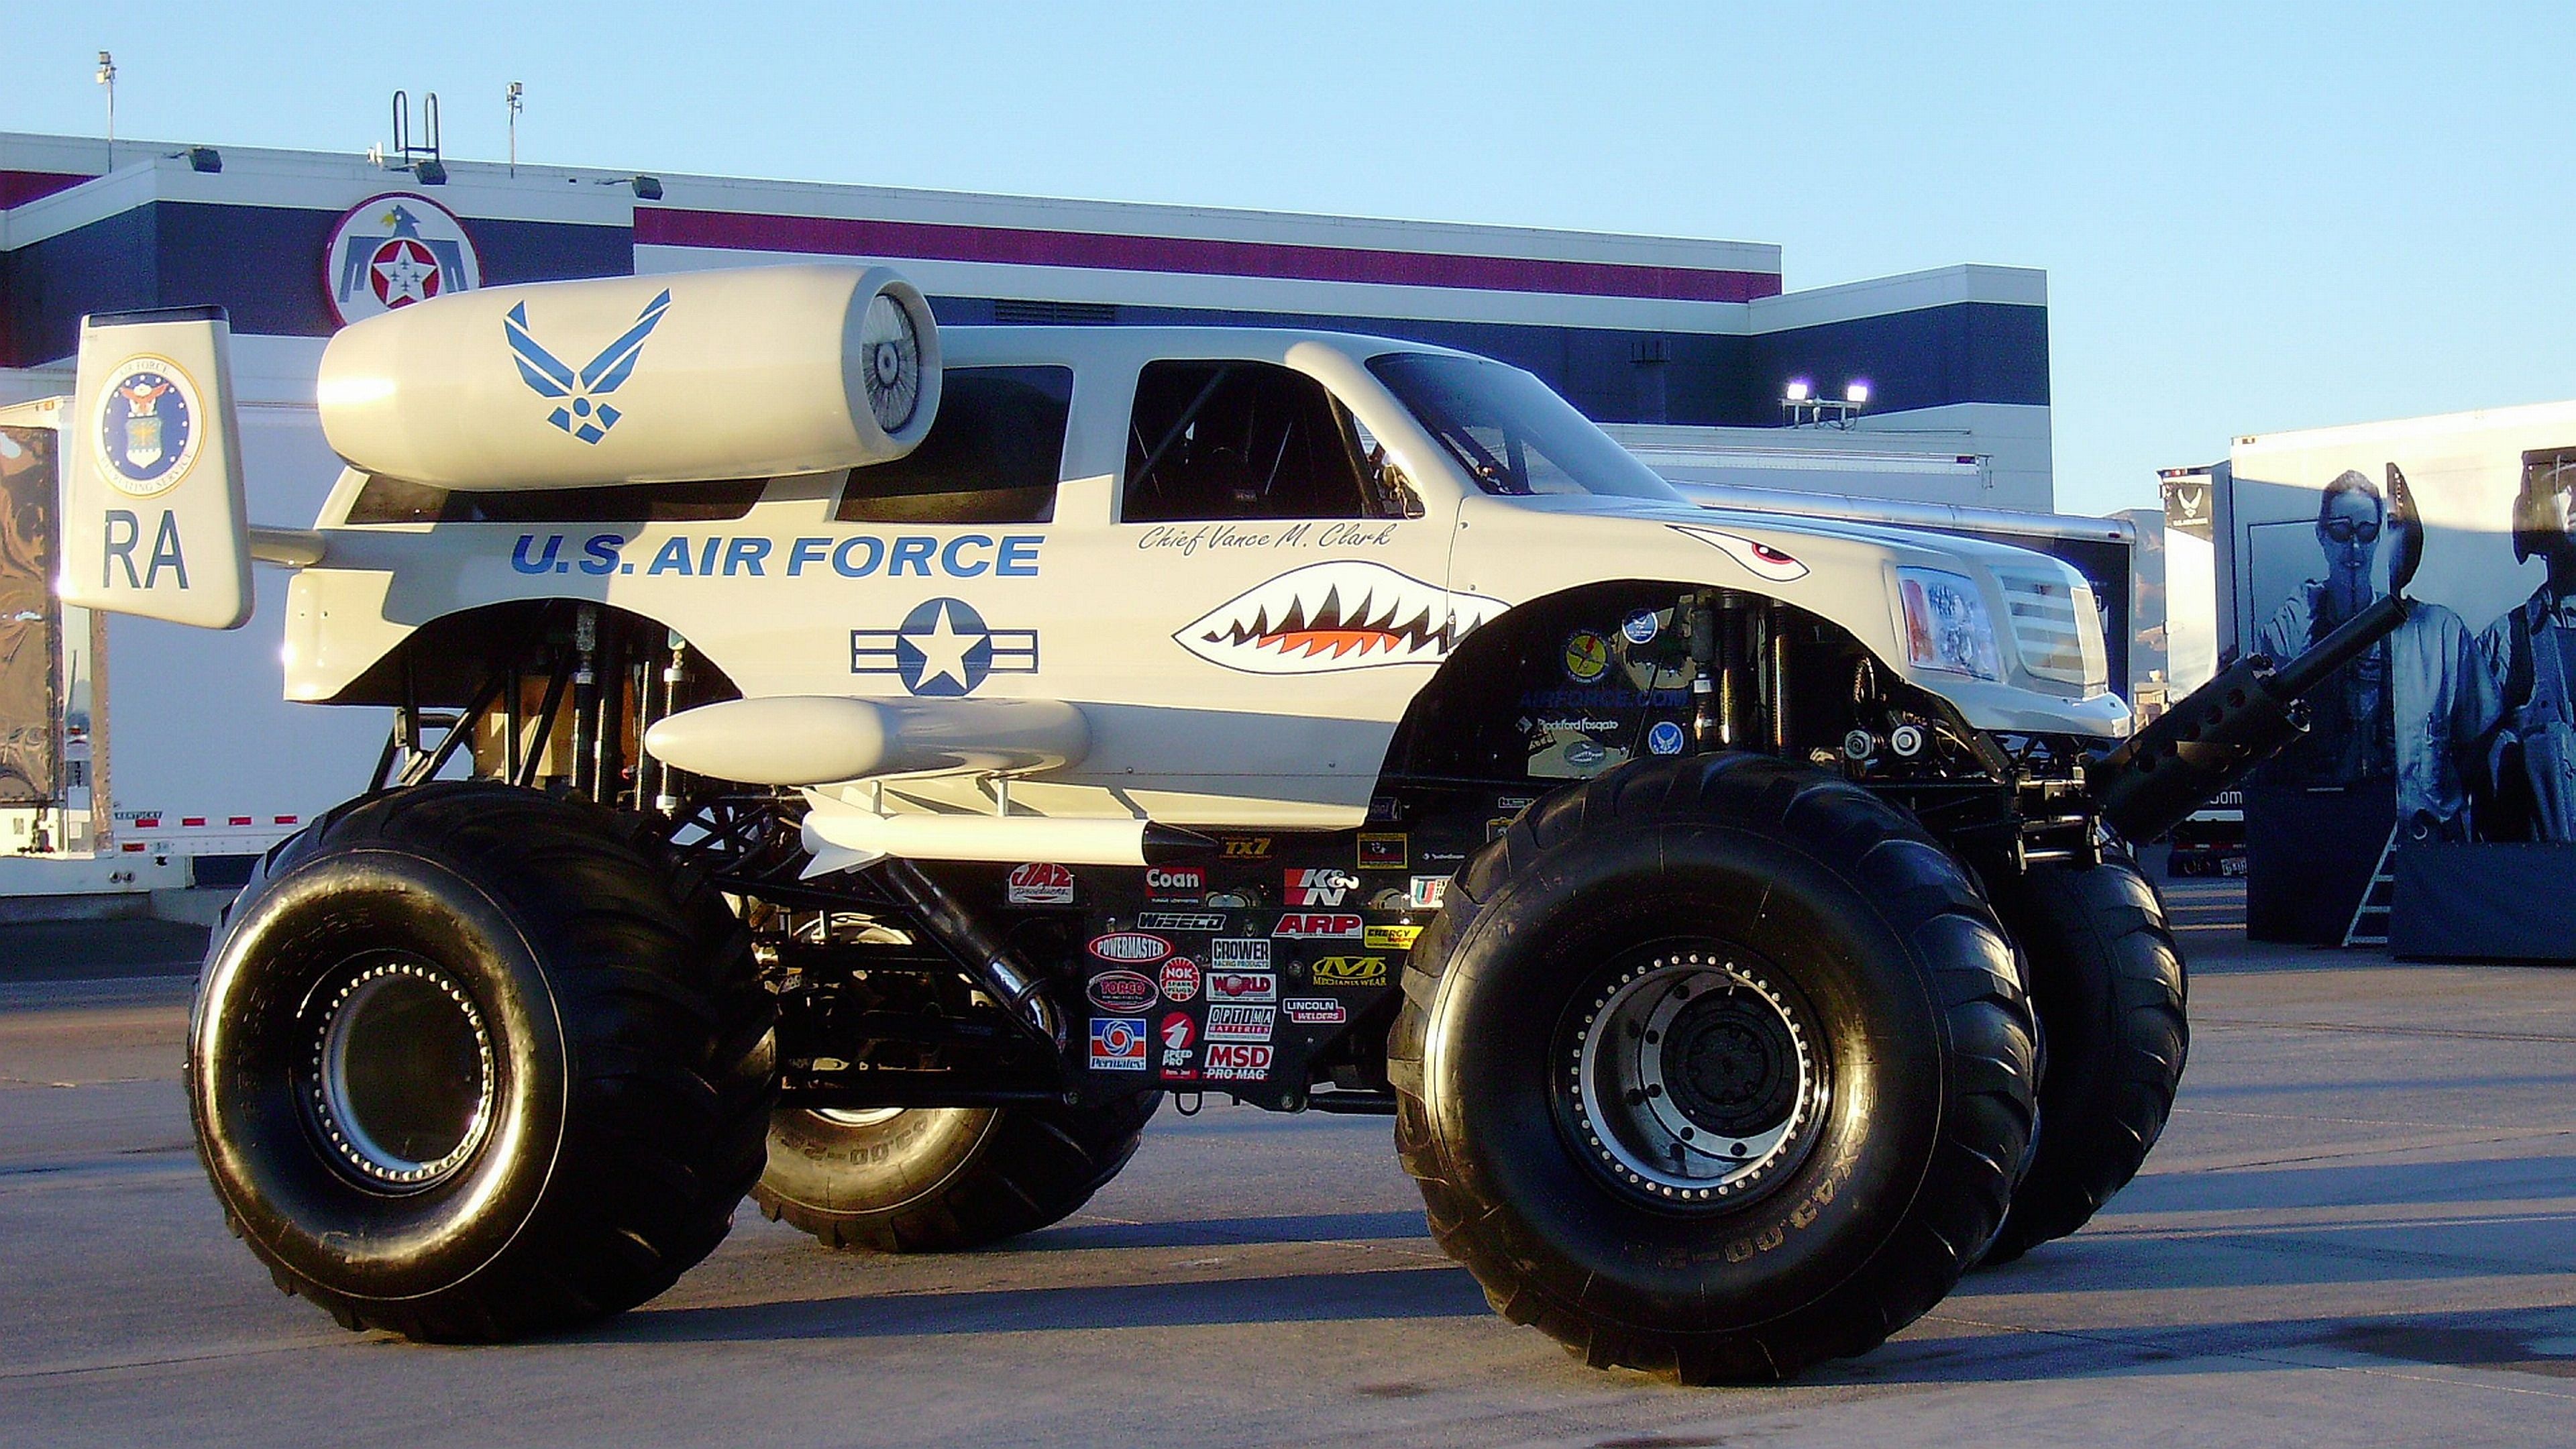 Monster Truck: U.S. Air Force, A specialized off-road vehicle, A heavy-duty suspension, Four-wheel steering. 3840x2160 4K Background.